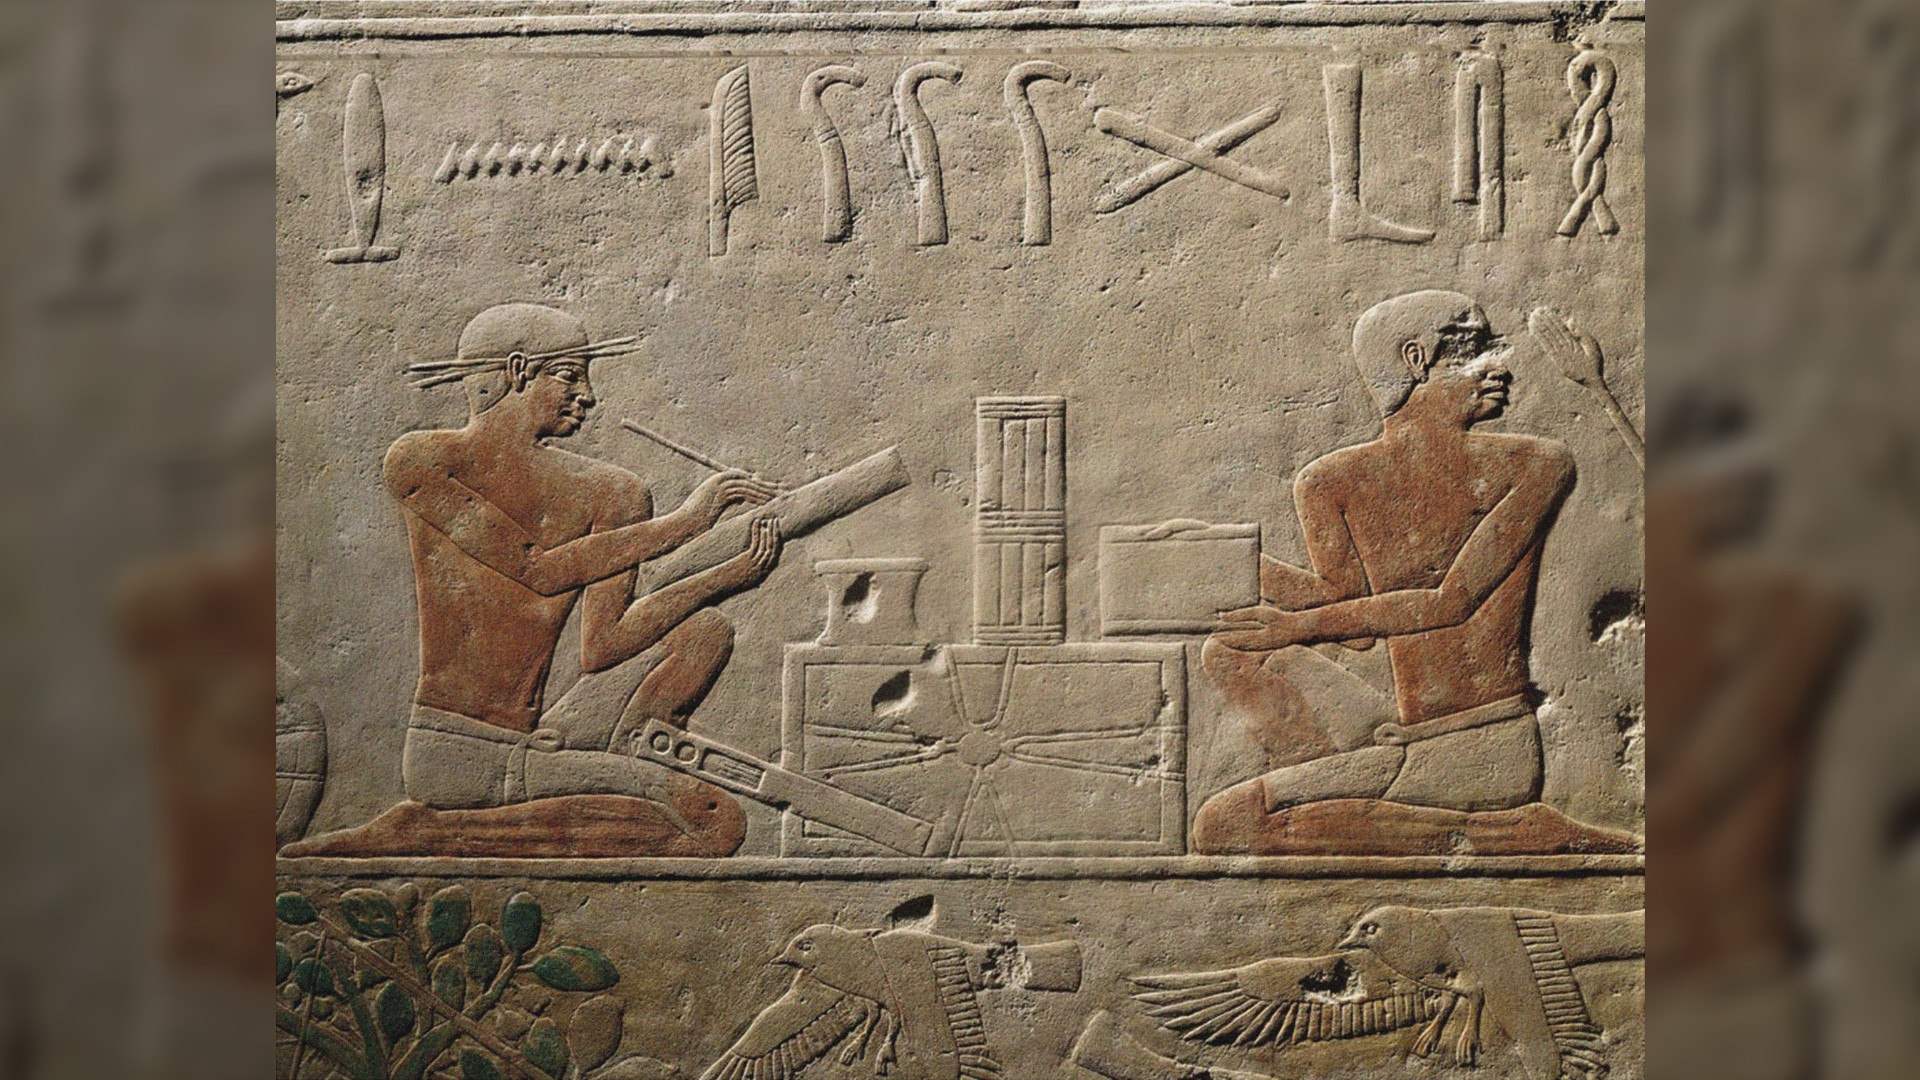 This is a relief from Mastaba of Akhethotep at Saqqara, Old Kingdom from around the 5th Dynasty, ca 2494-2345 B.C. Here we see 2 scribes facing each other. One is writing on a tablet, whilst the other is holding up some parchment. Above them are several hieroglyphs and below there are 2 images of flying birds.